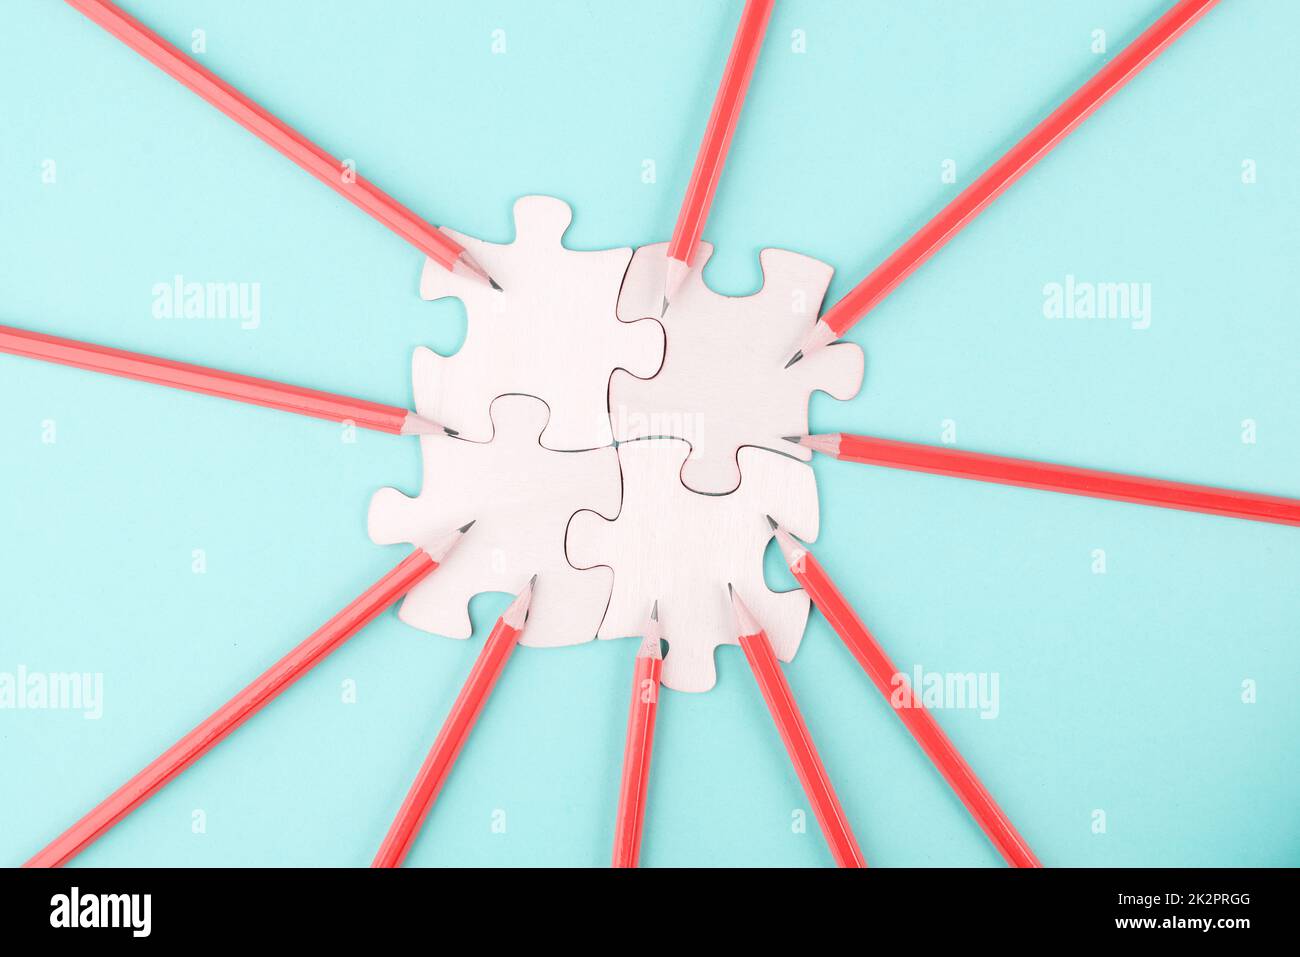 Working as a team, puzzle pieces connect together, pencils point to the jigsaw, brainstorming for ideas, business and education concept Stock Photo